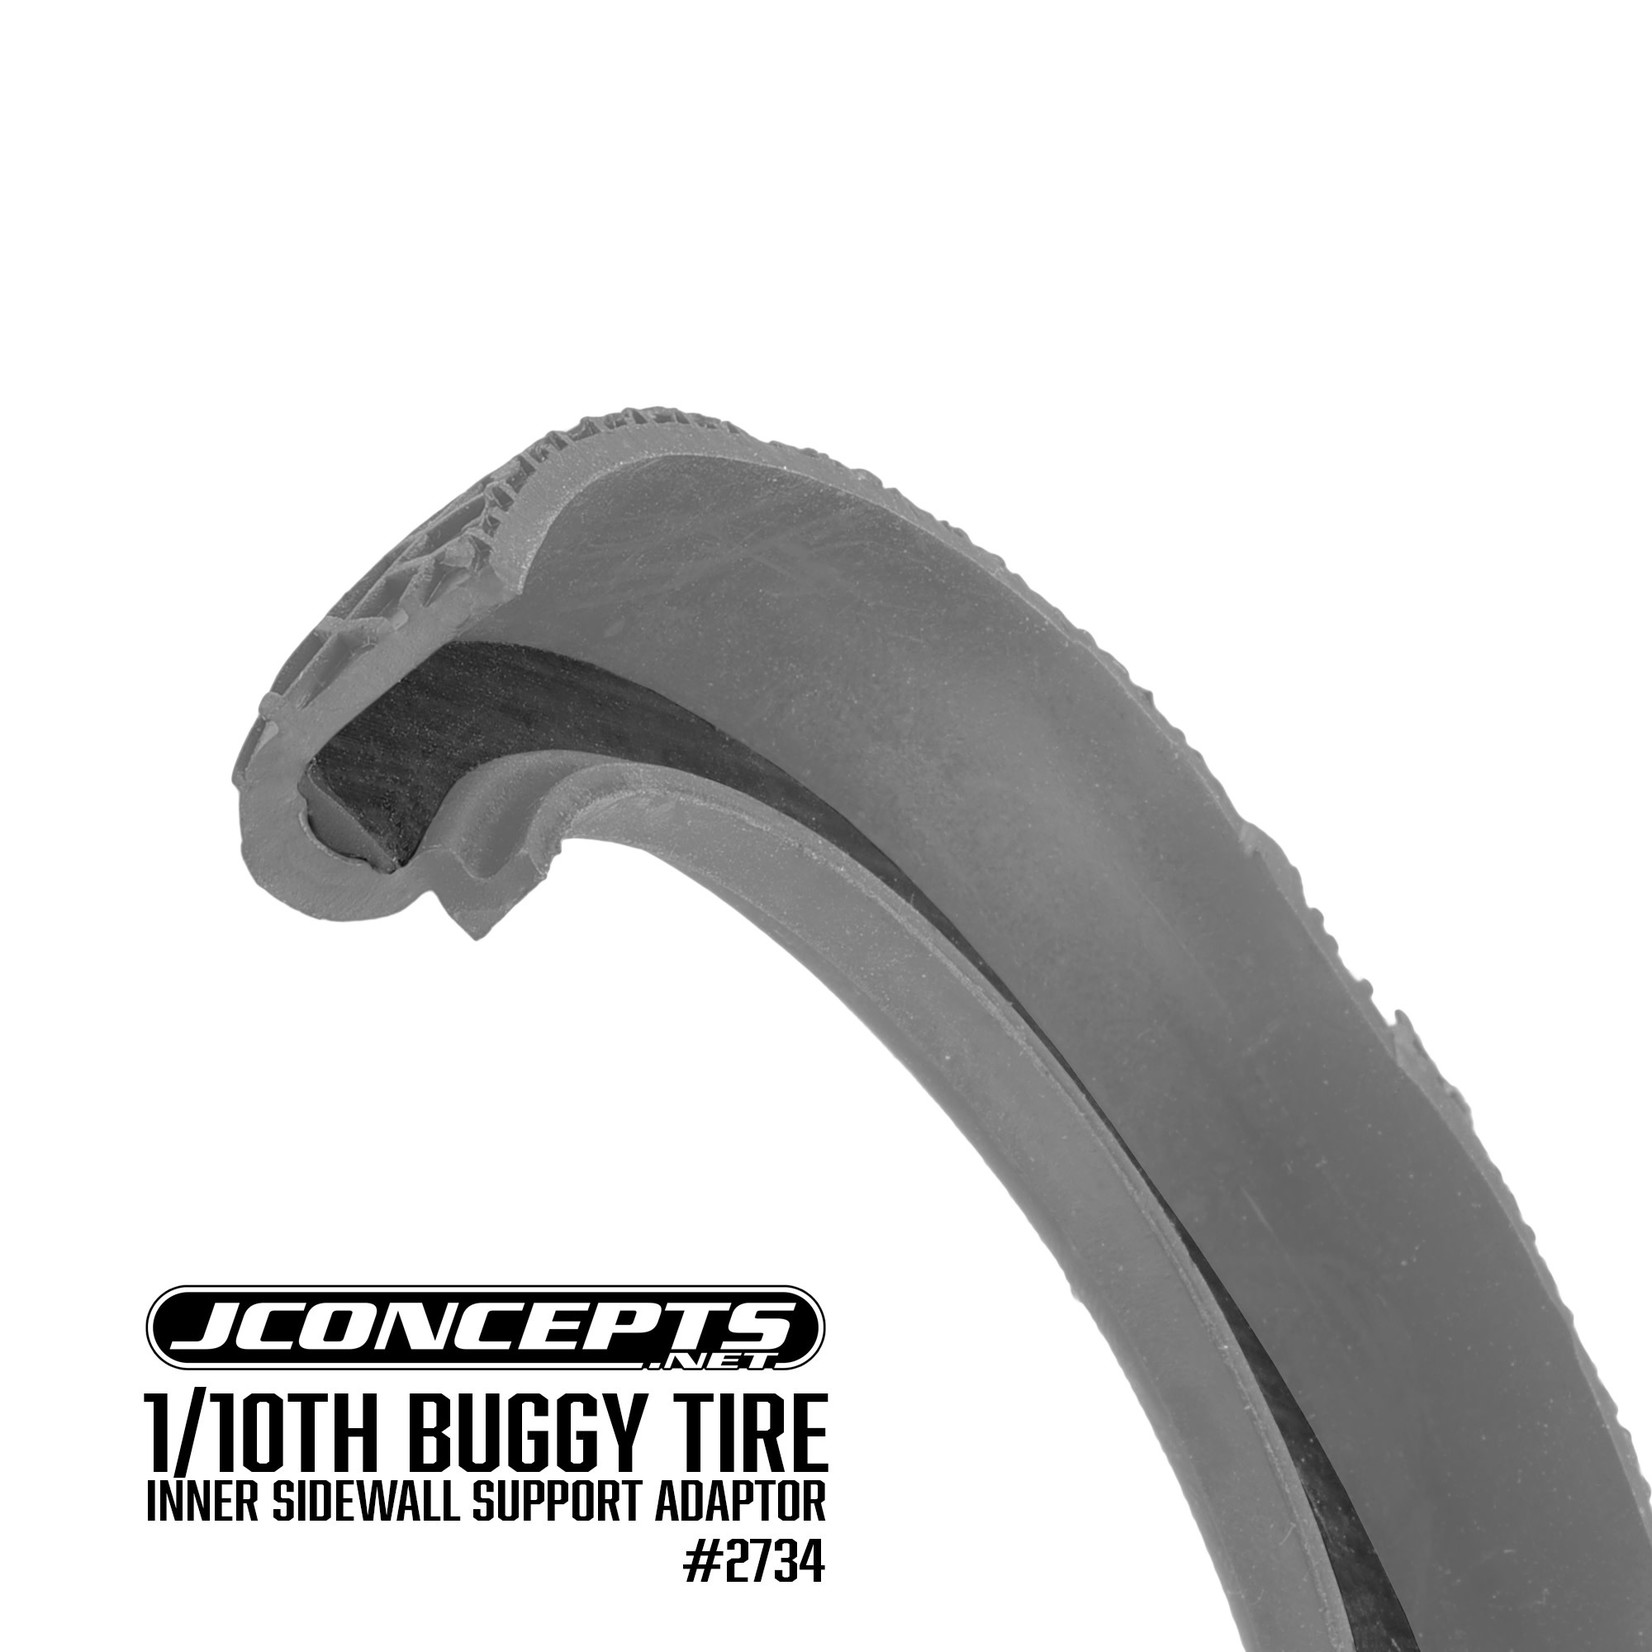 JConcepts JCO2734 JConcepts 1/10th 2.2" Buggy Tire Inner Sidewall Support Adaptor (4)